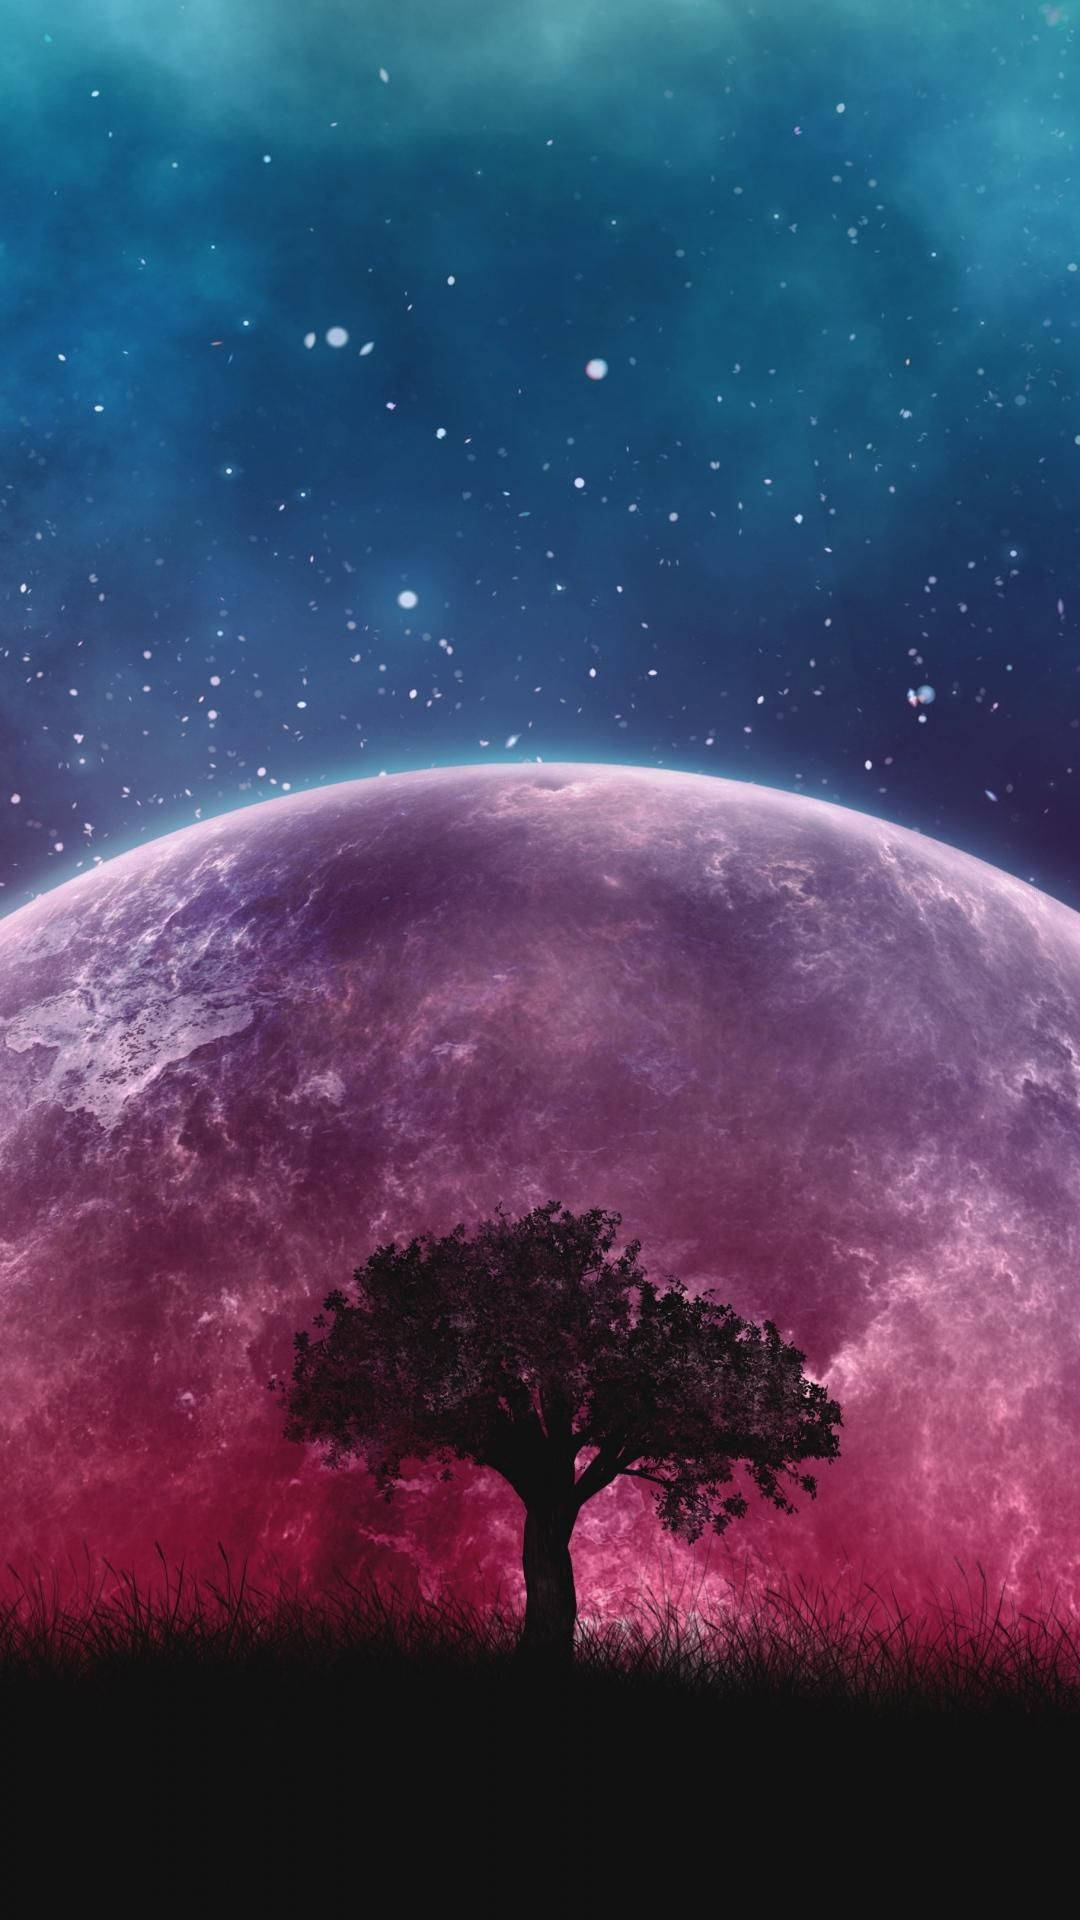 Tree Over A Cute Galaxy Picture